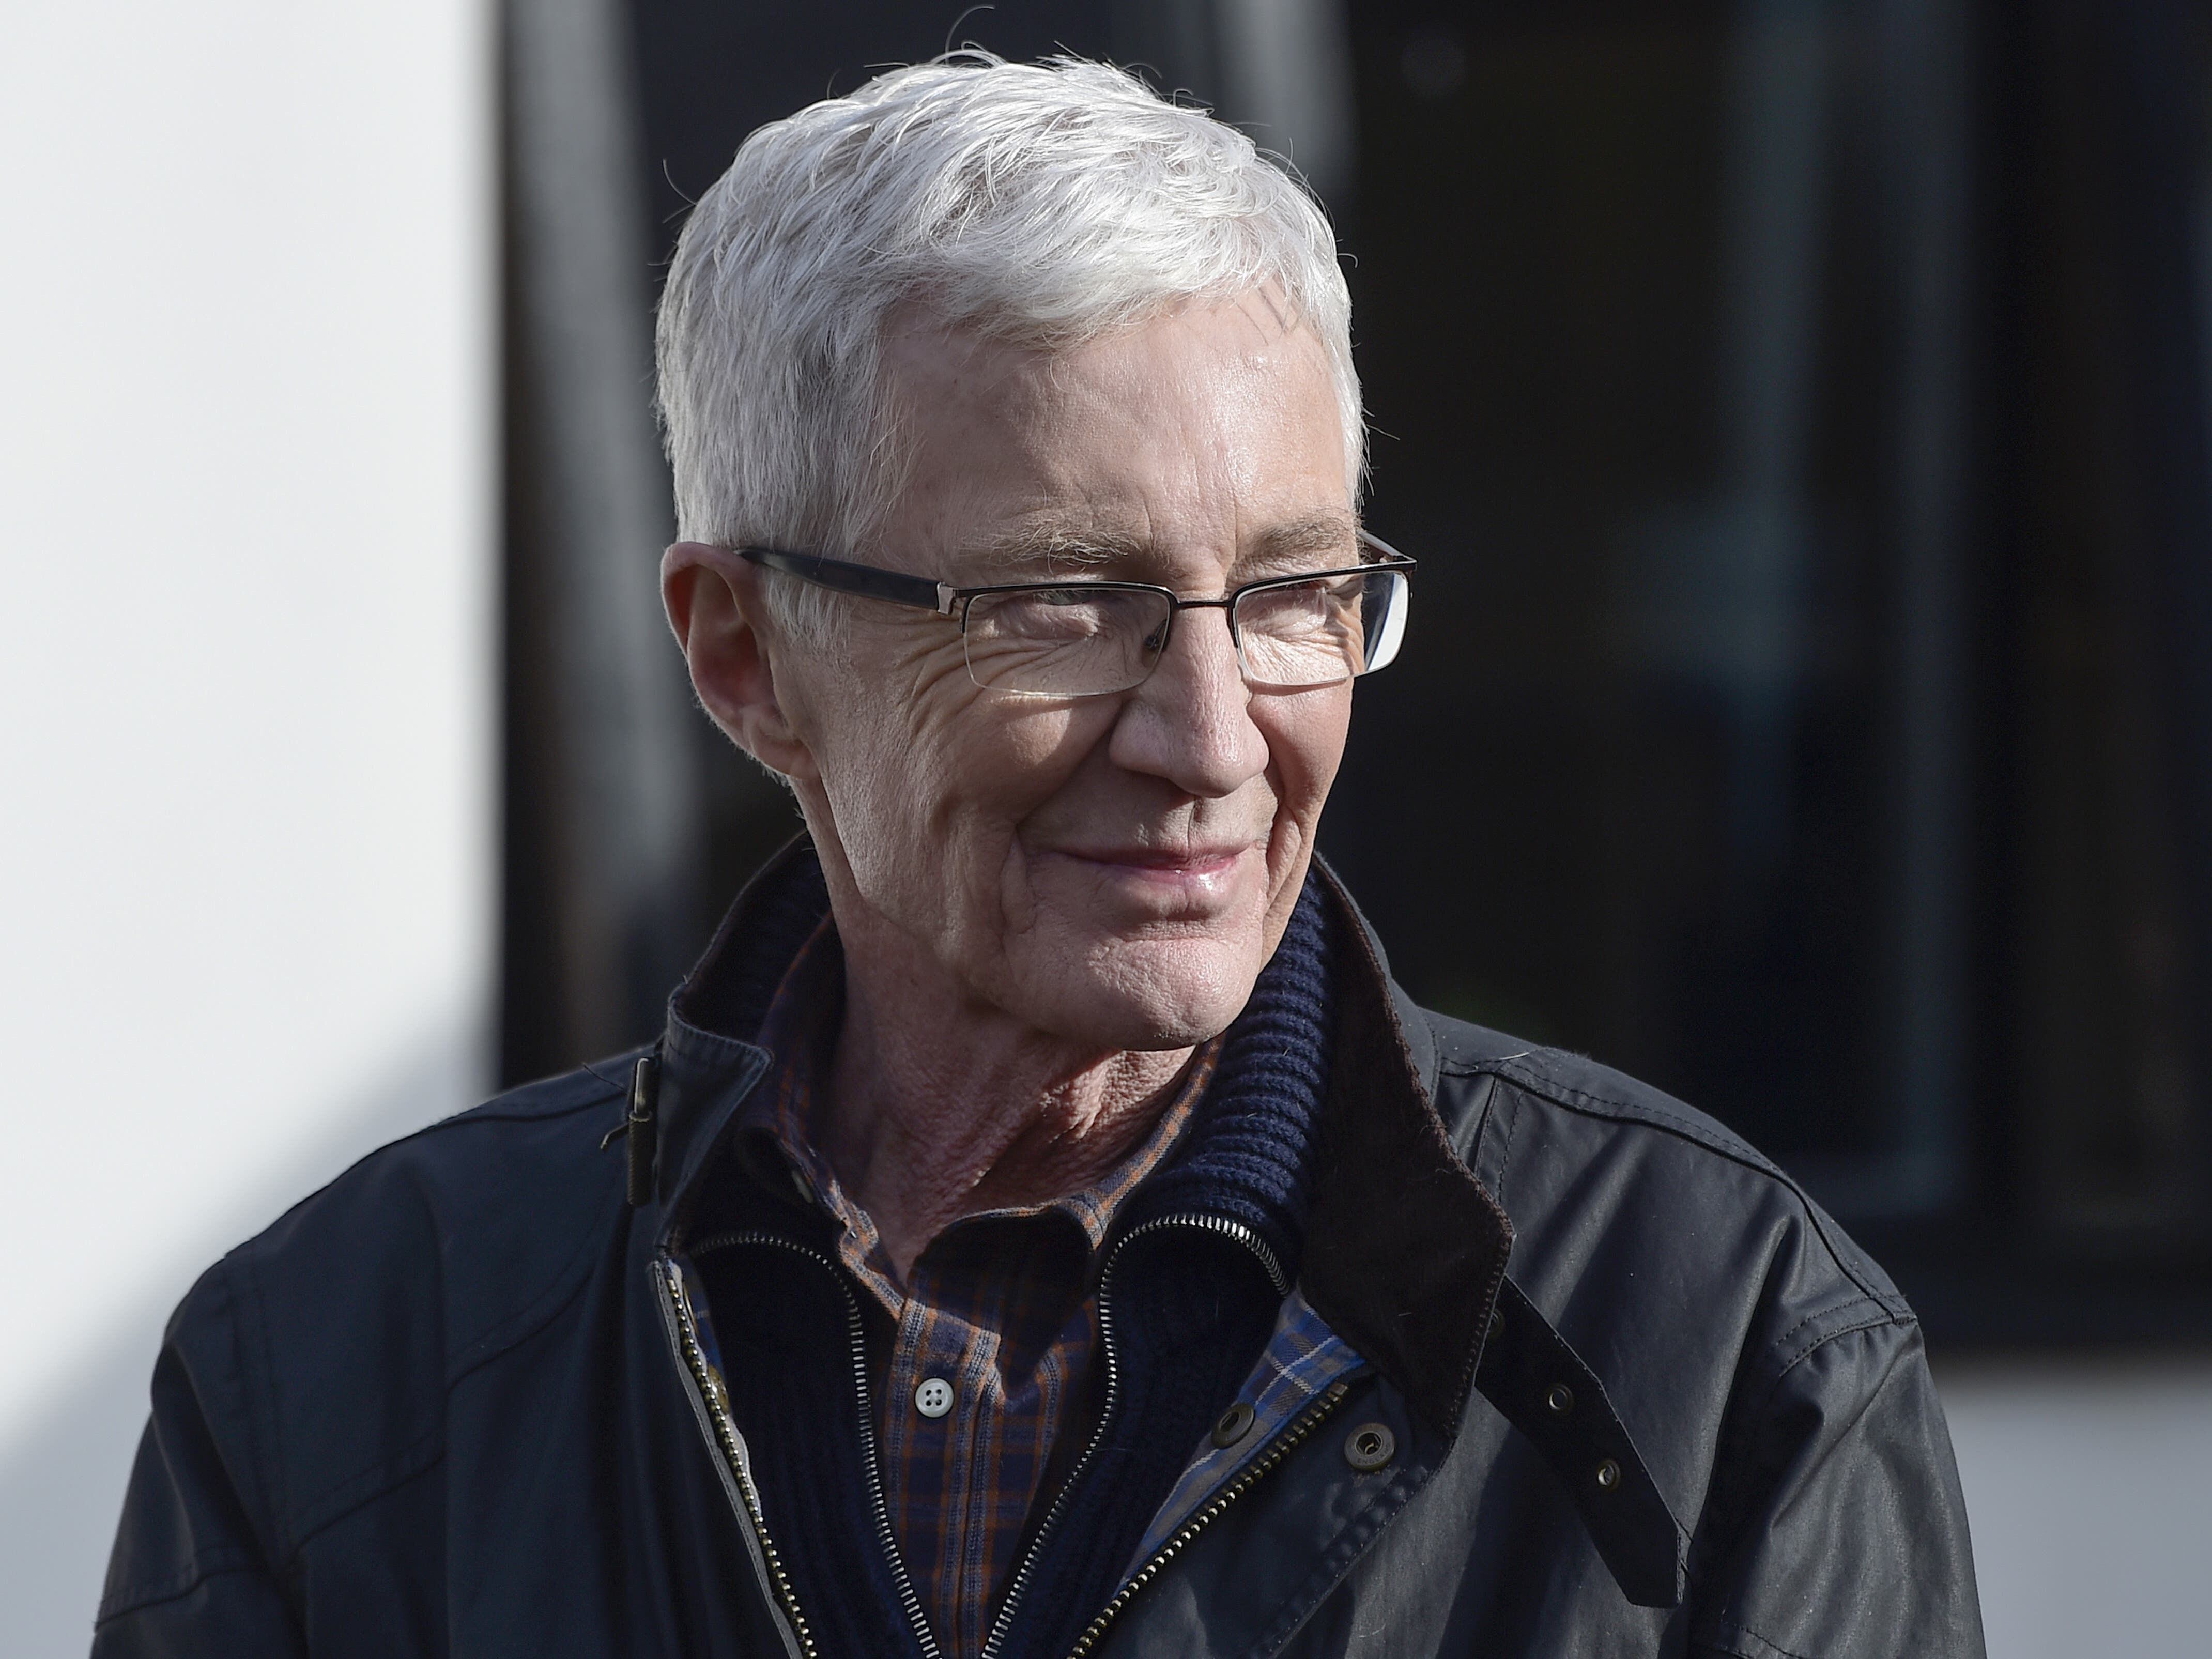 Paul O’Grady’s widower took their dogs for a final goodbye before his burial